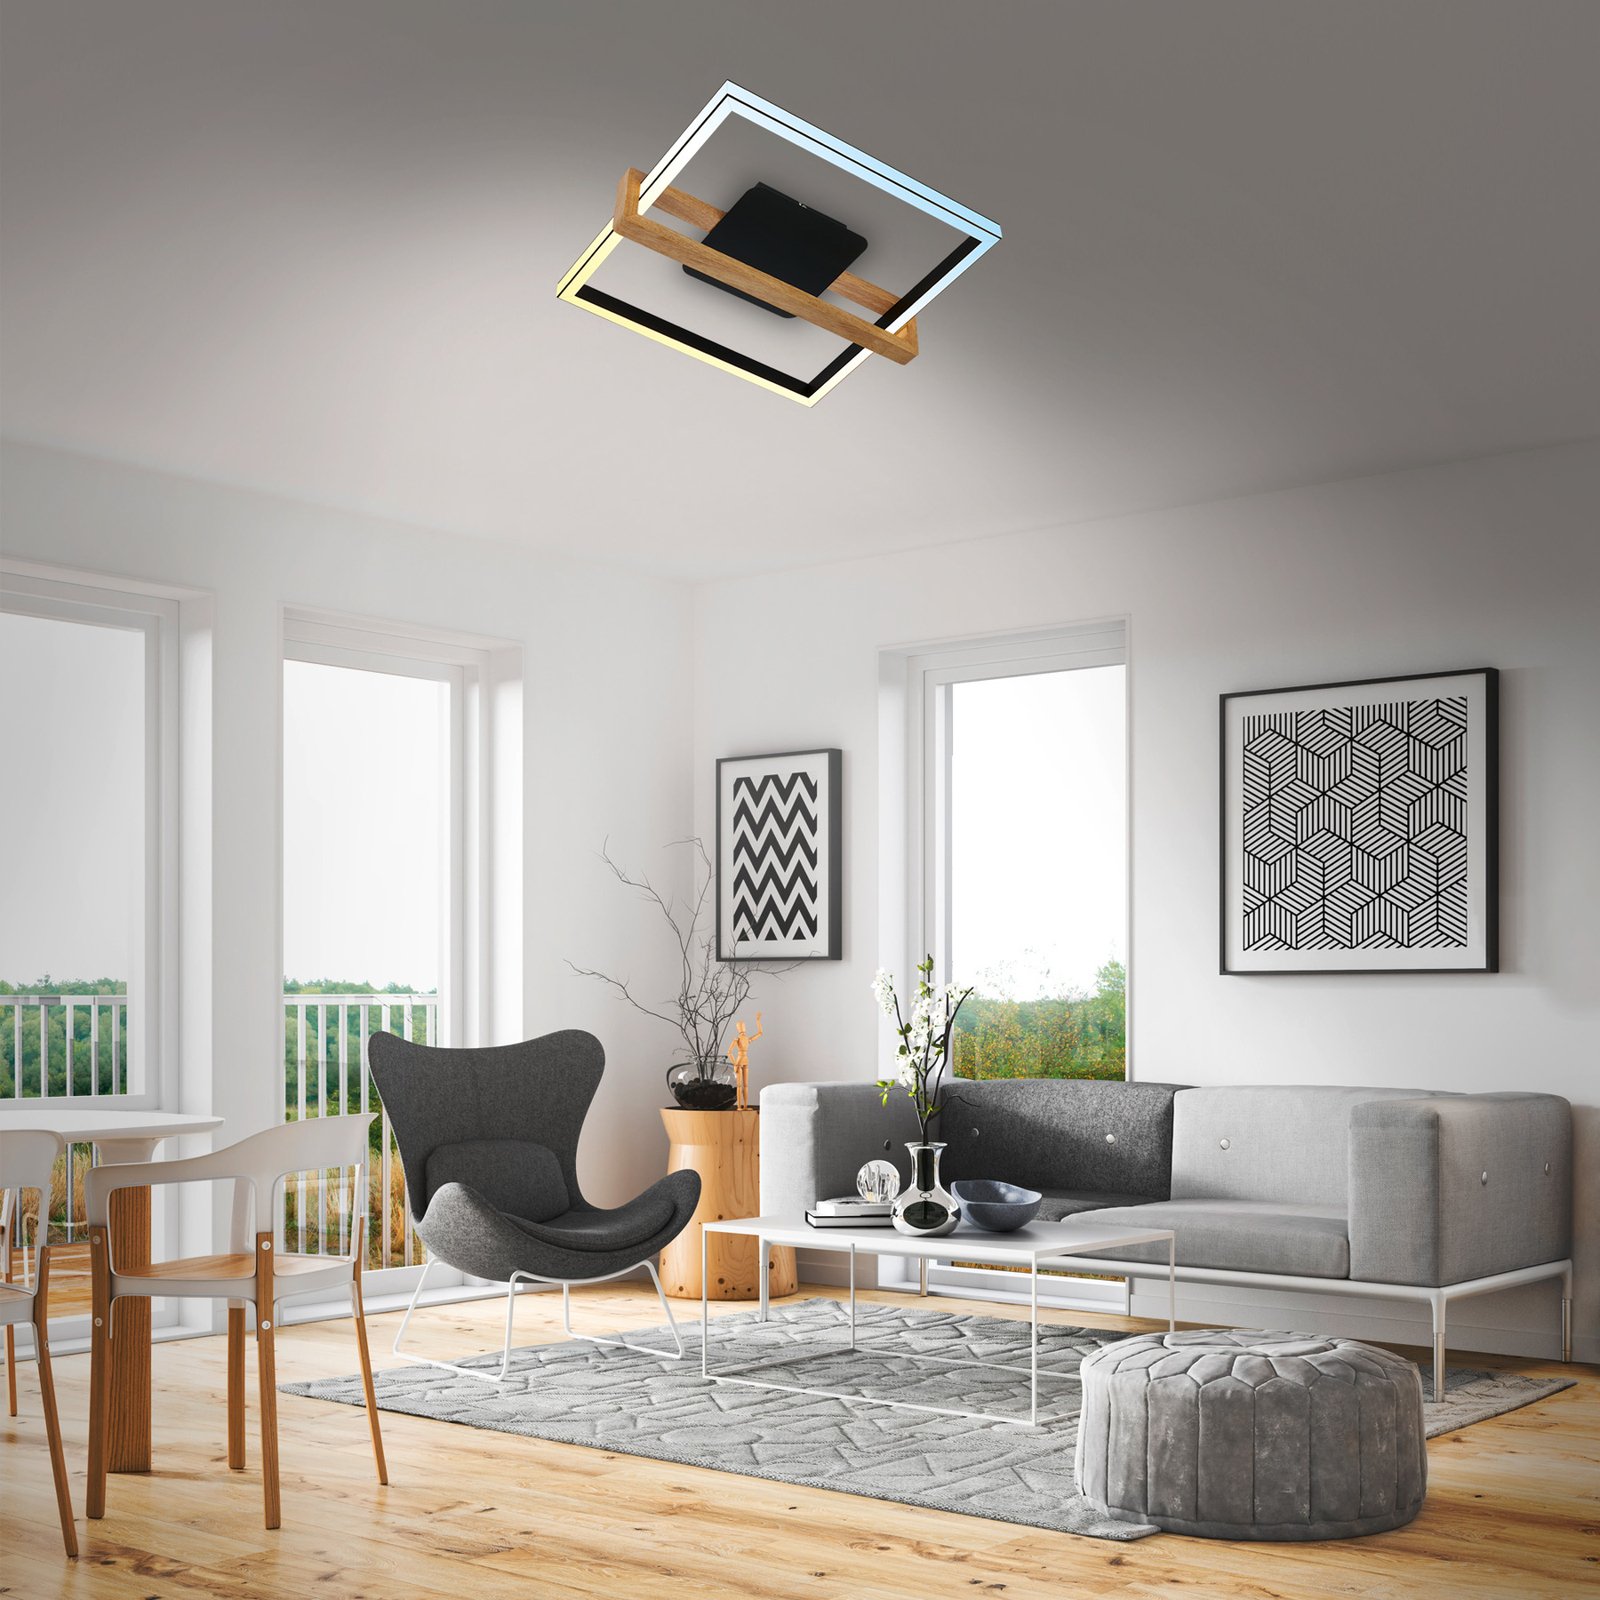 LED ceiling light 3768015 CCT with remote control